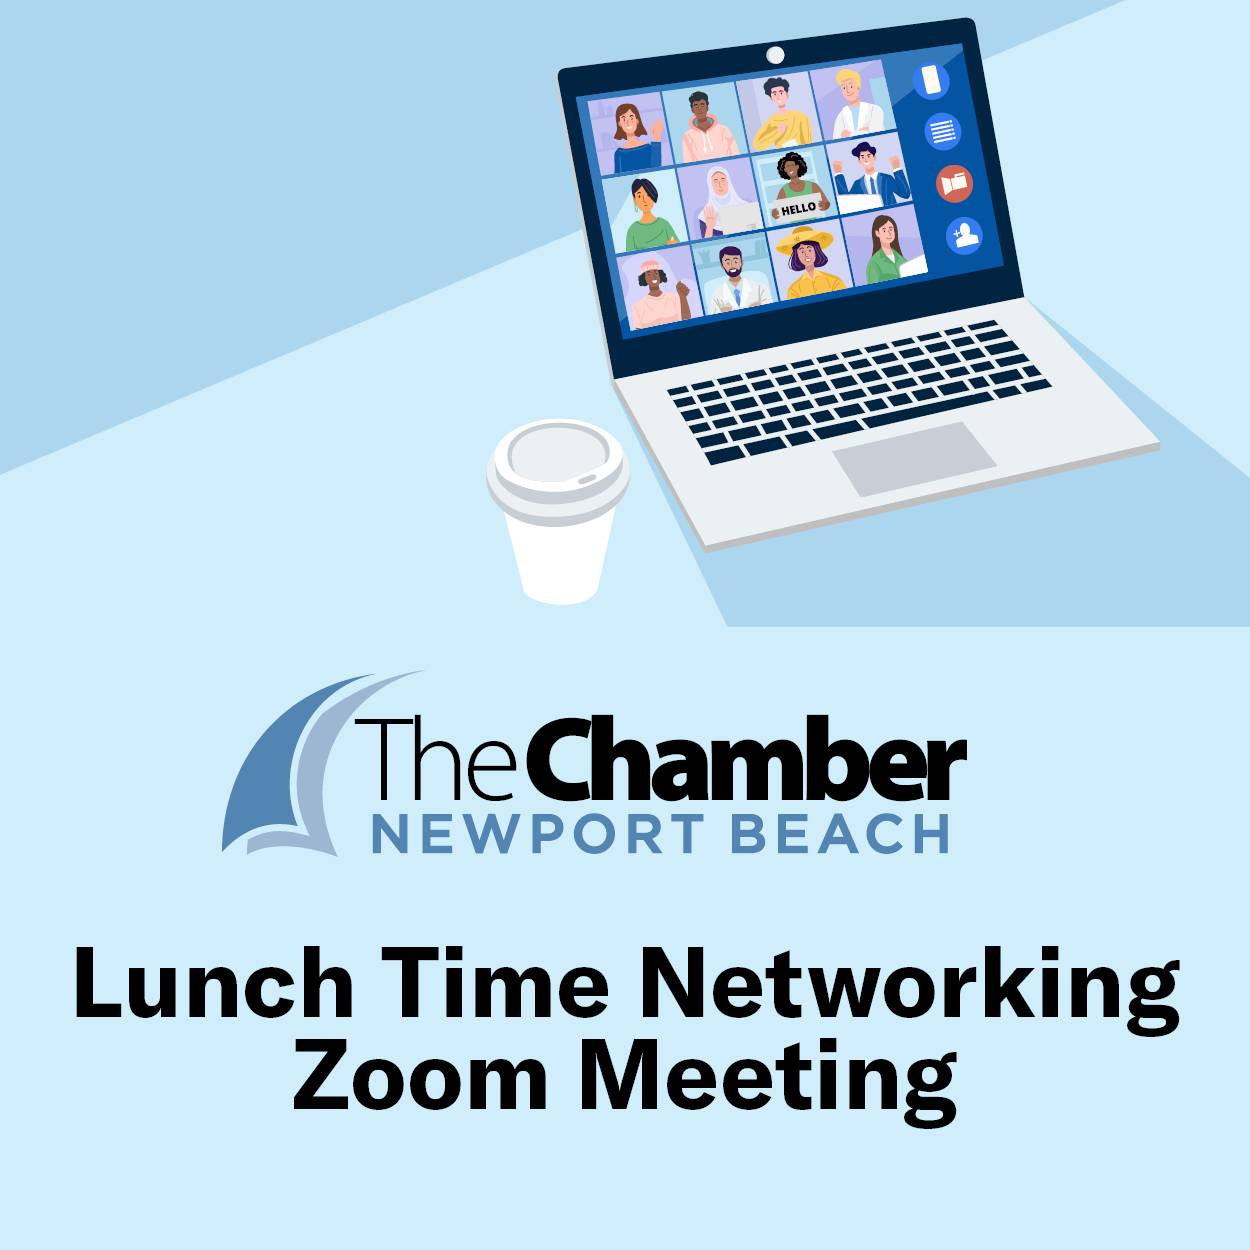 January 2022 Lunch Time Networking Zoom Meeting